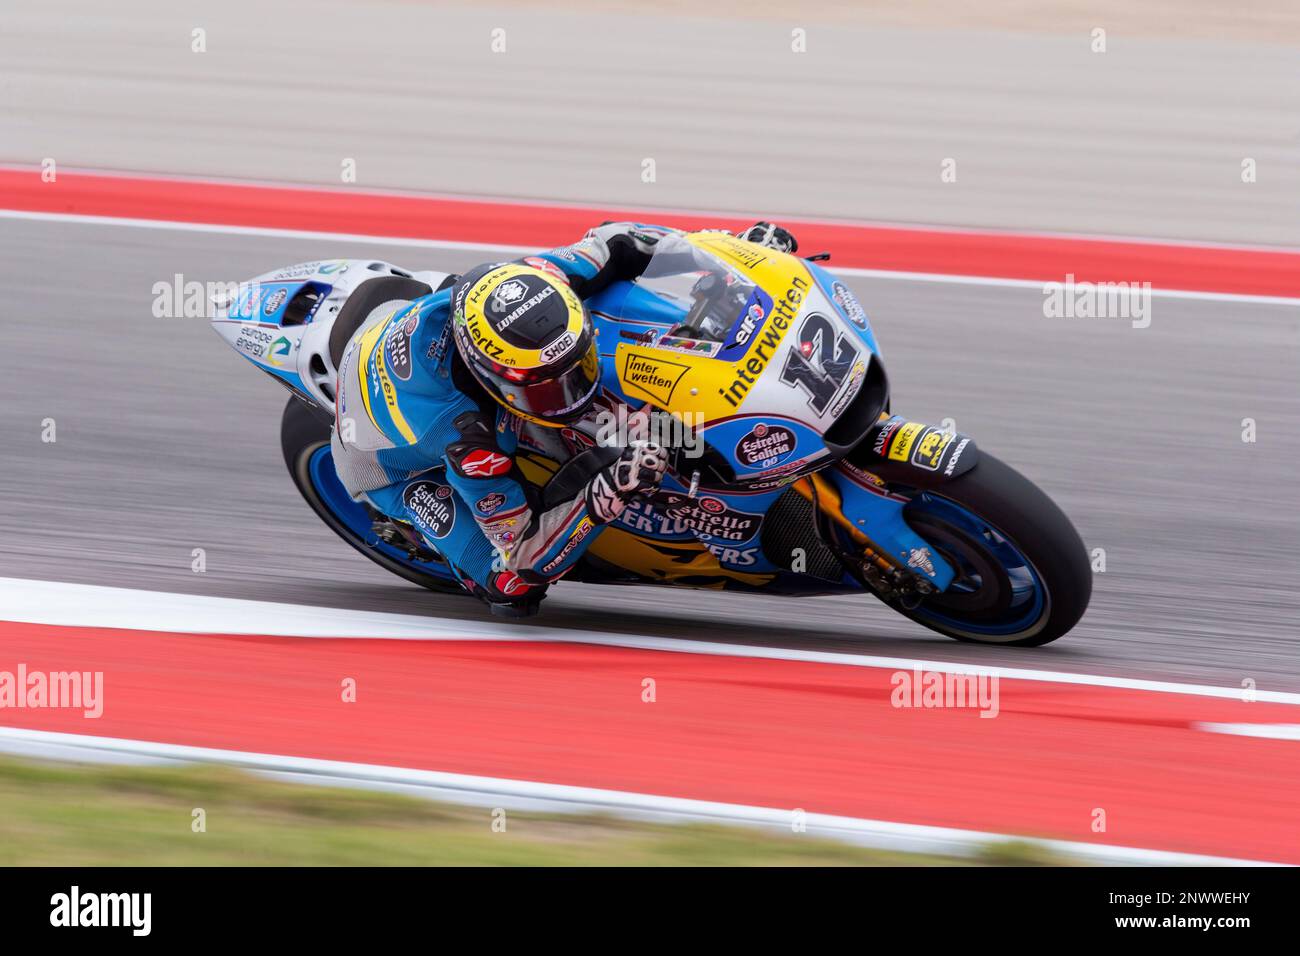 AUSTIN, TX - APRIL 21: EG 0,0 Marc VDS Thomas Luthi (12) in action during  Free Practice 3 for the Grand Prix of the Americas MotoGP race on April 21,  2018 at